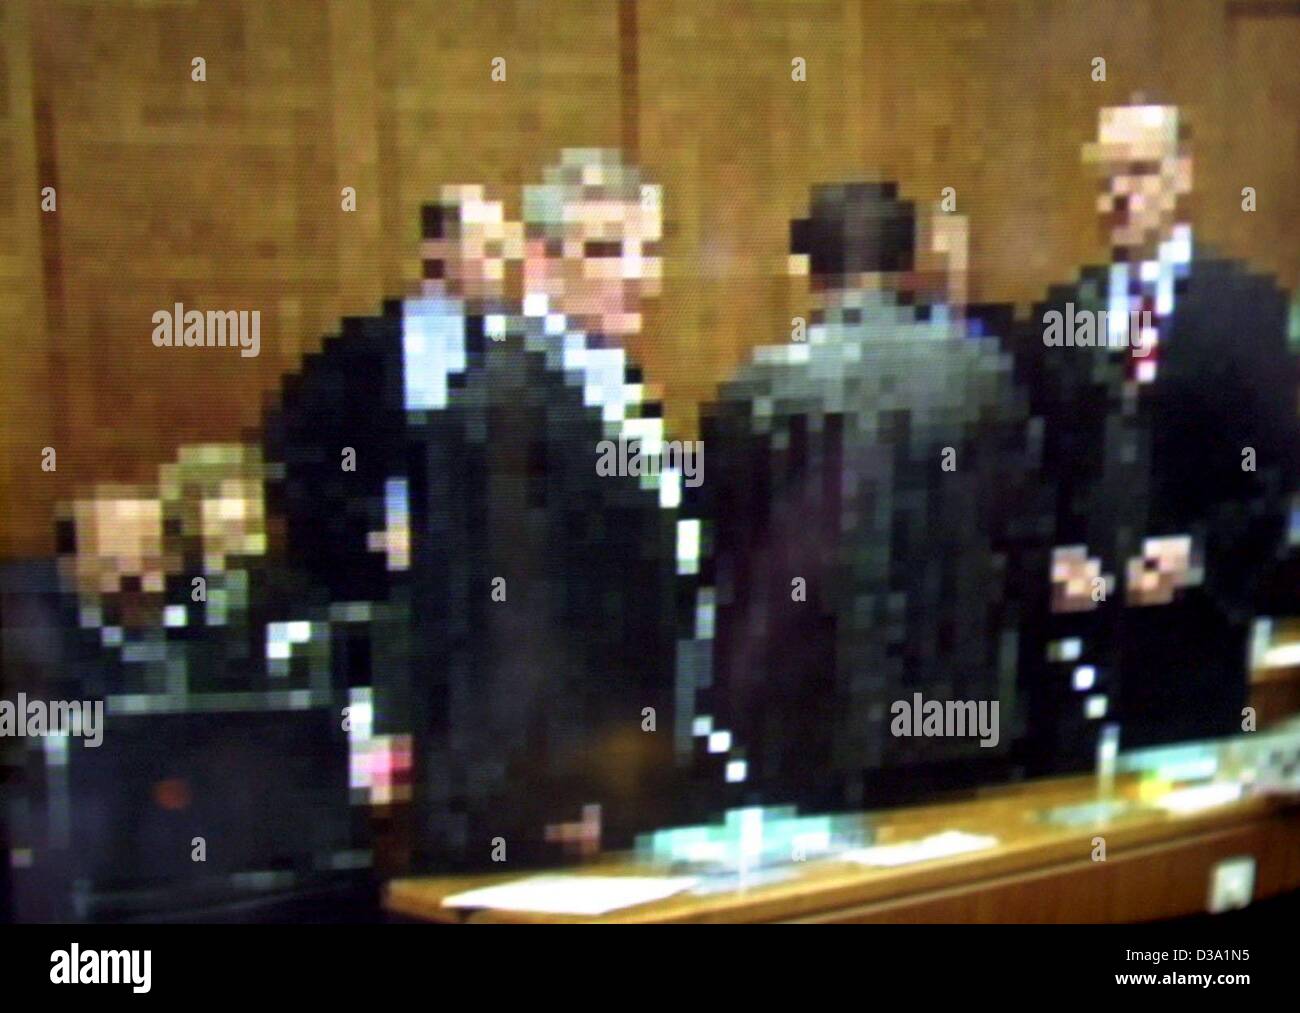 (dpa) - The accused at the socalled Al Qaeda trial stand inside the courtroom of the Higher Regional Court in Frankfurt, 16 April 2002, prior to the opening of the trial. - Notice: This is a video grab from German TV station ZDF especially blurred since the court had ruled that all trial participant Stock Photo